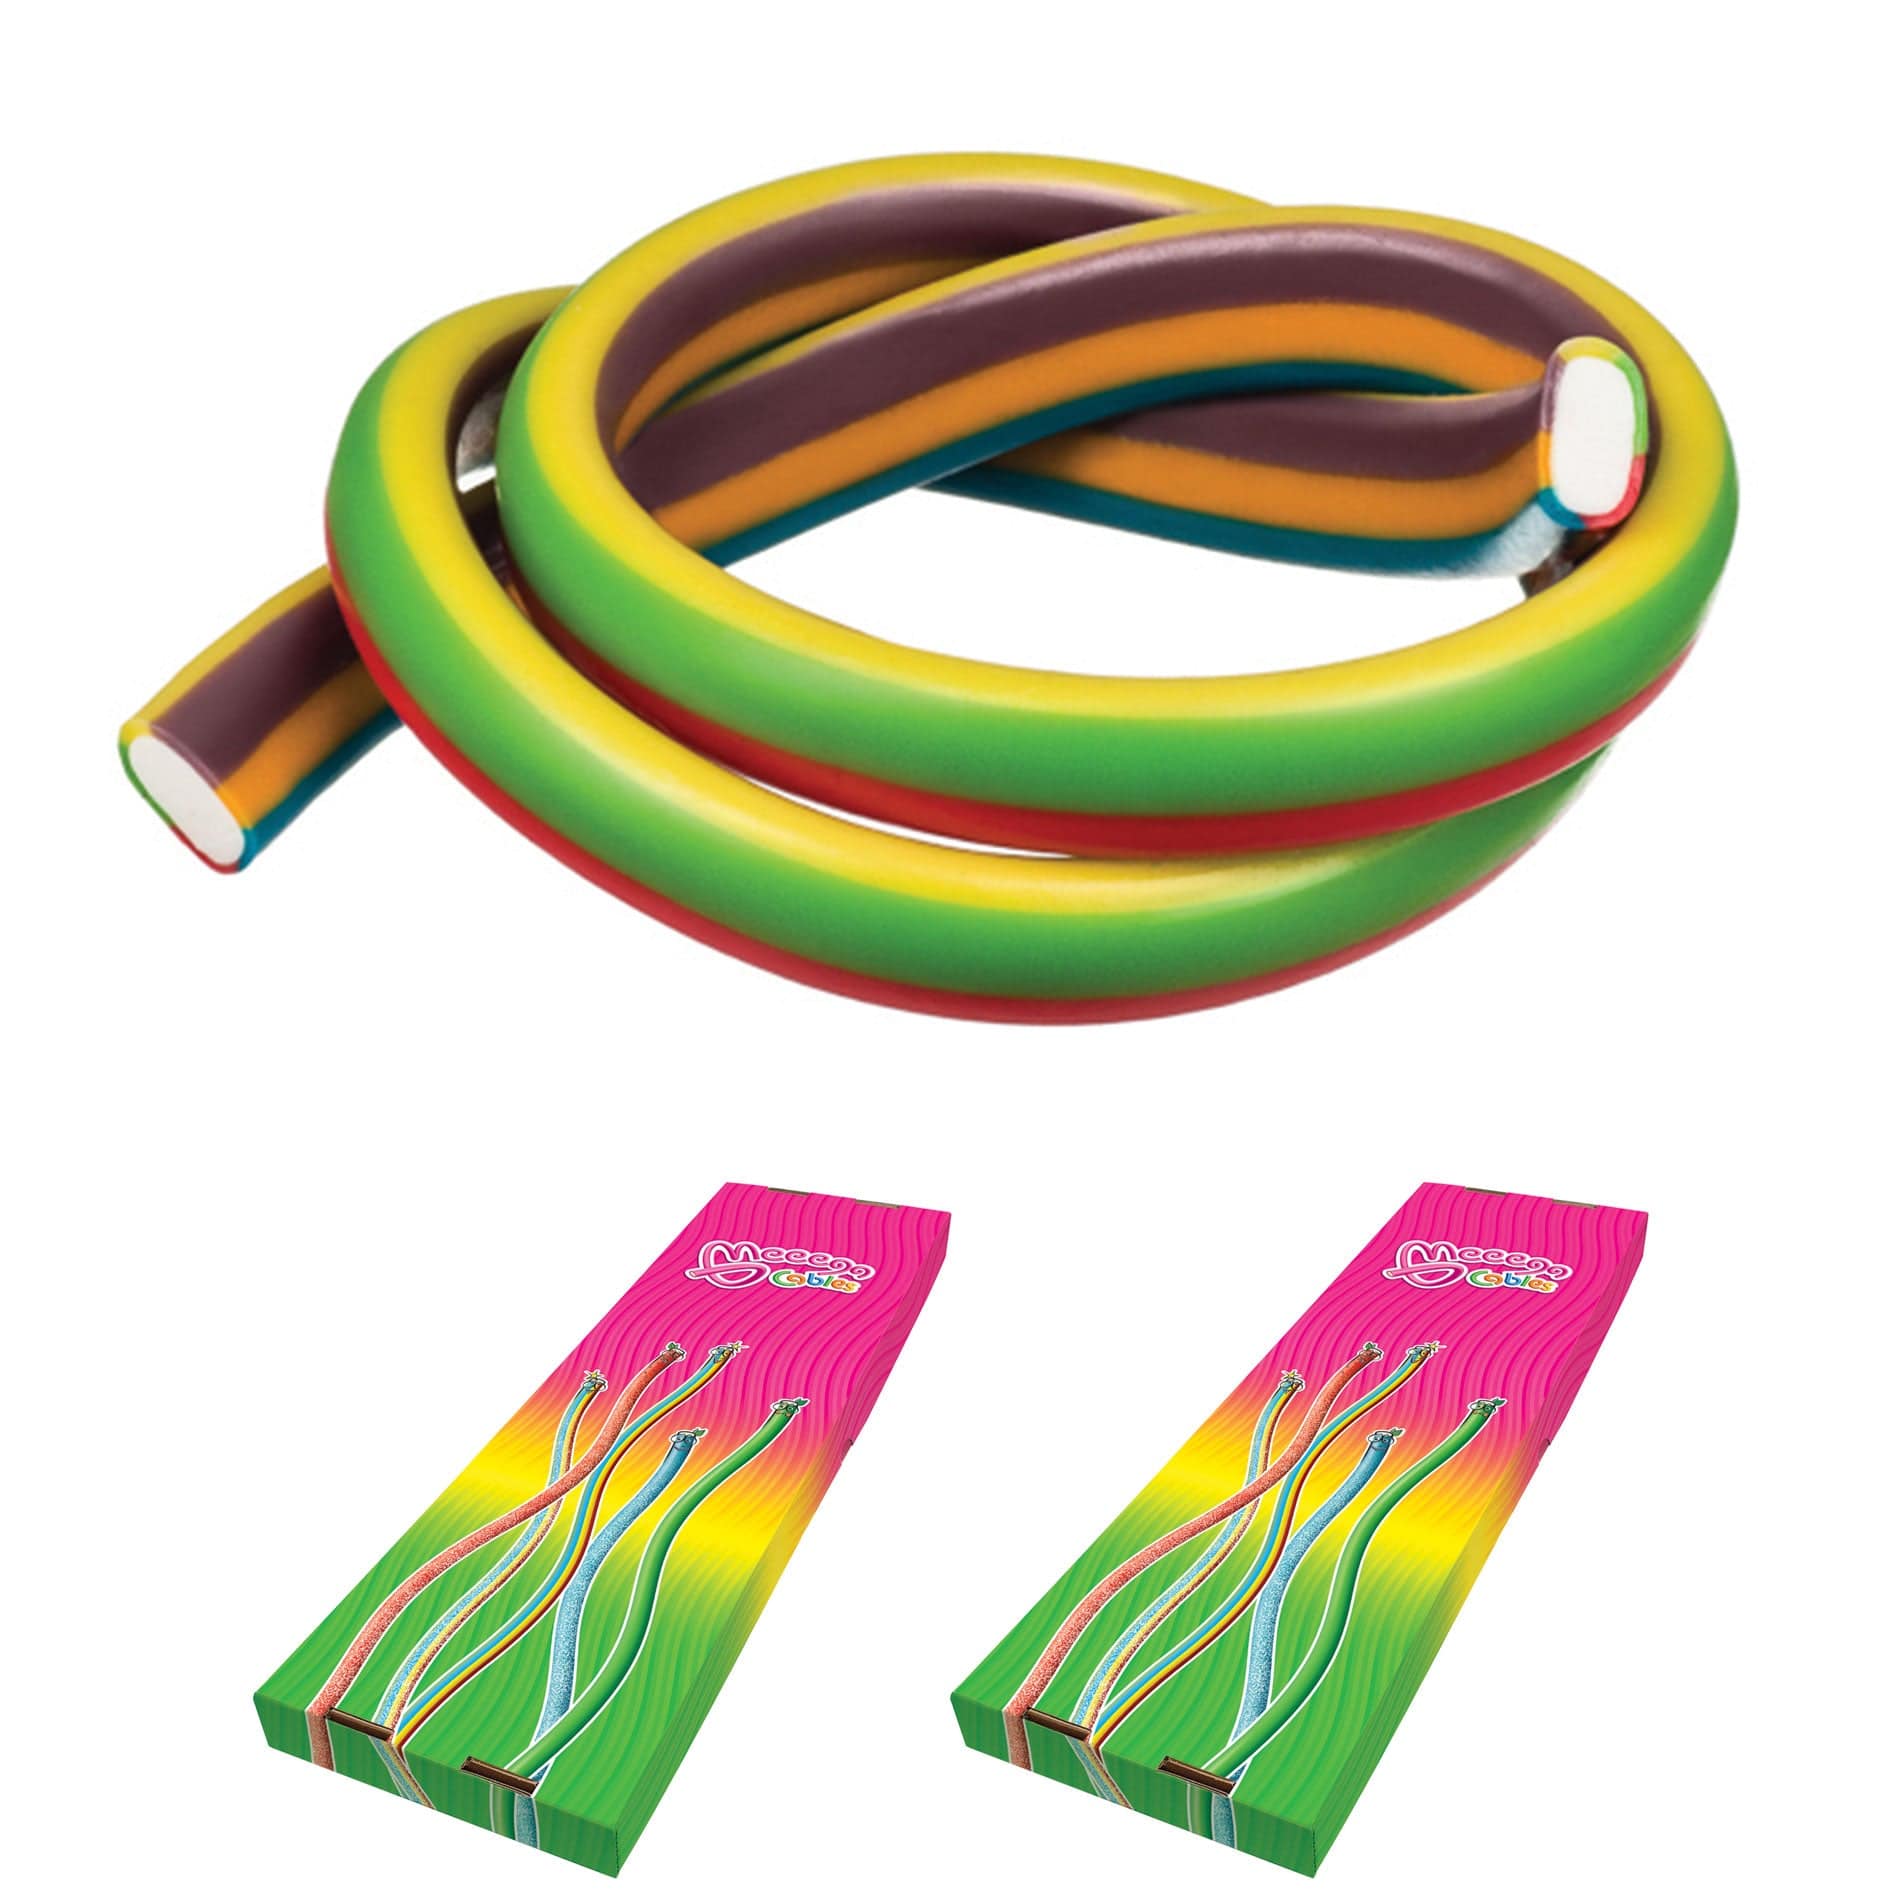 Novelty Concessions Gummy Rope SUNSHINE FRUIT / 2 Pack (60 pieces) Meeega Cables European Chewy Rope Candy - Box of 30 individually wrapped Meeega Cables, each over 2-feet long cups with lids and straws